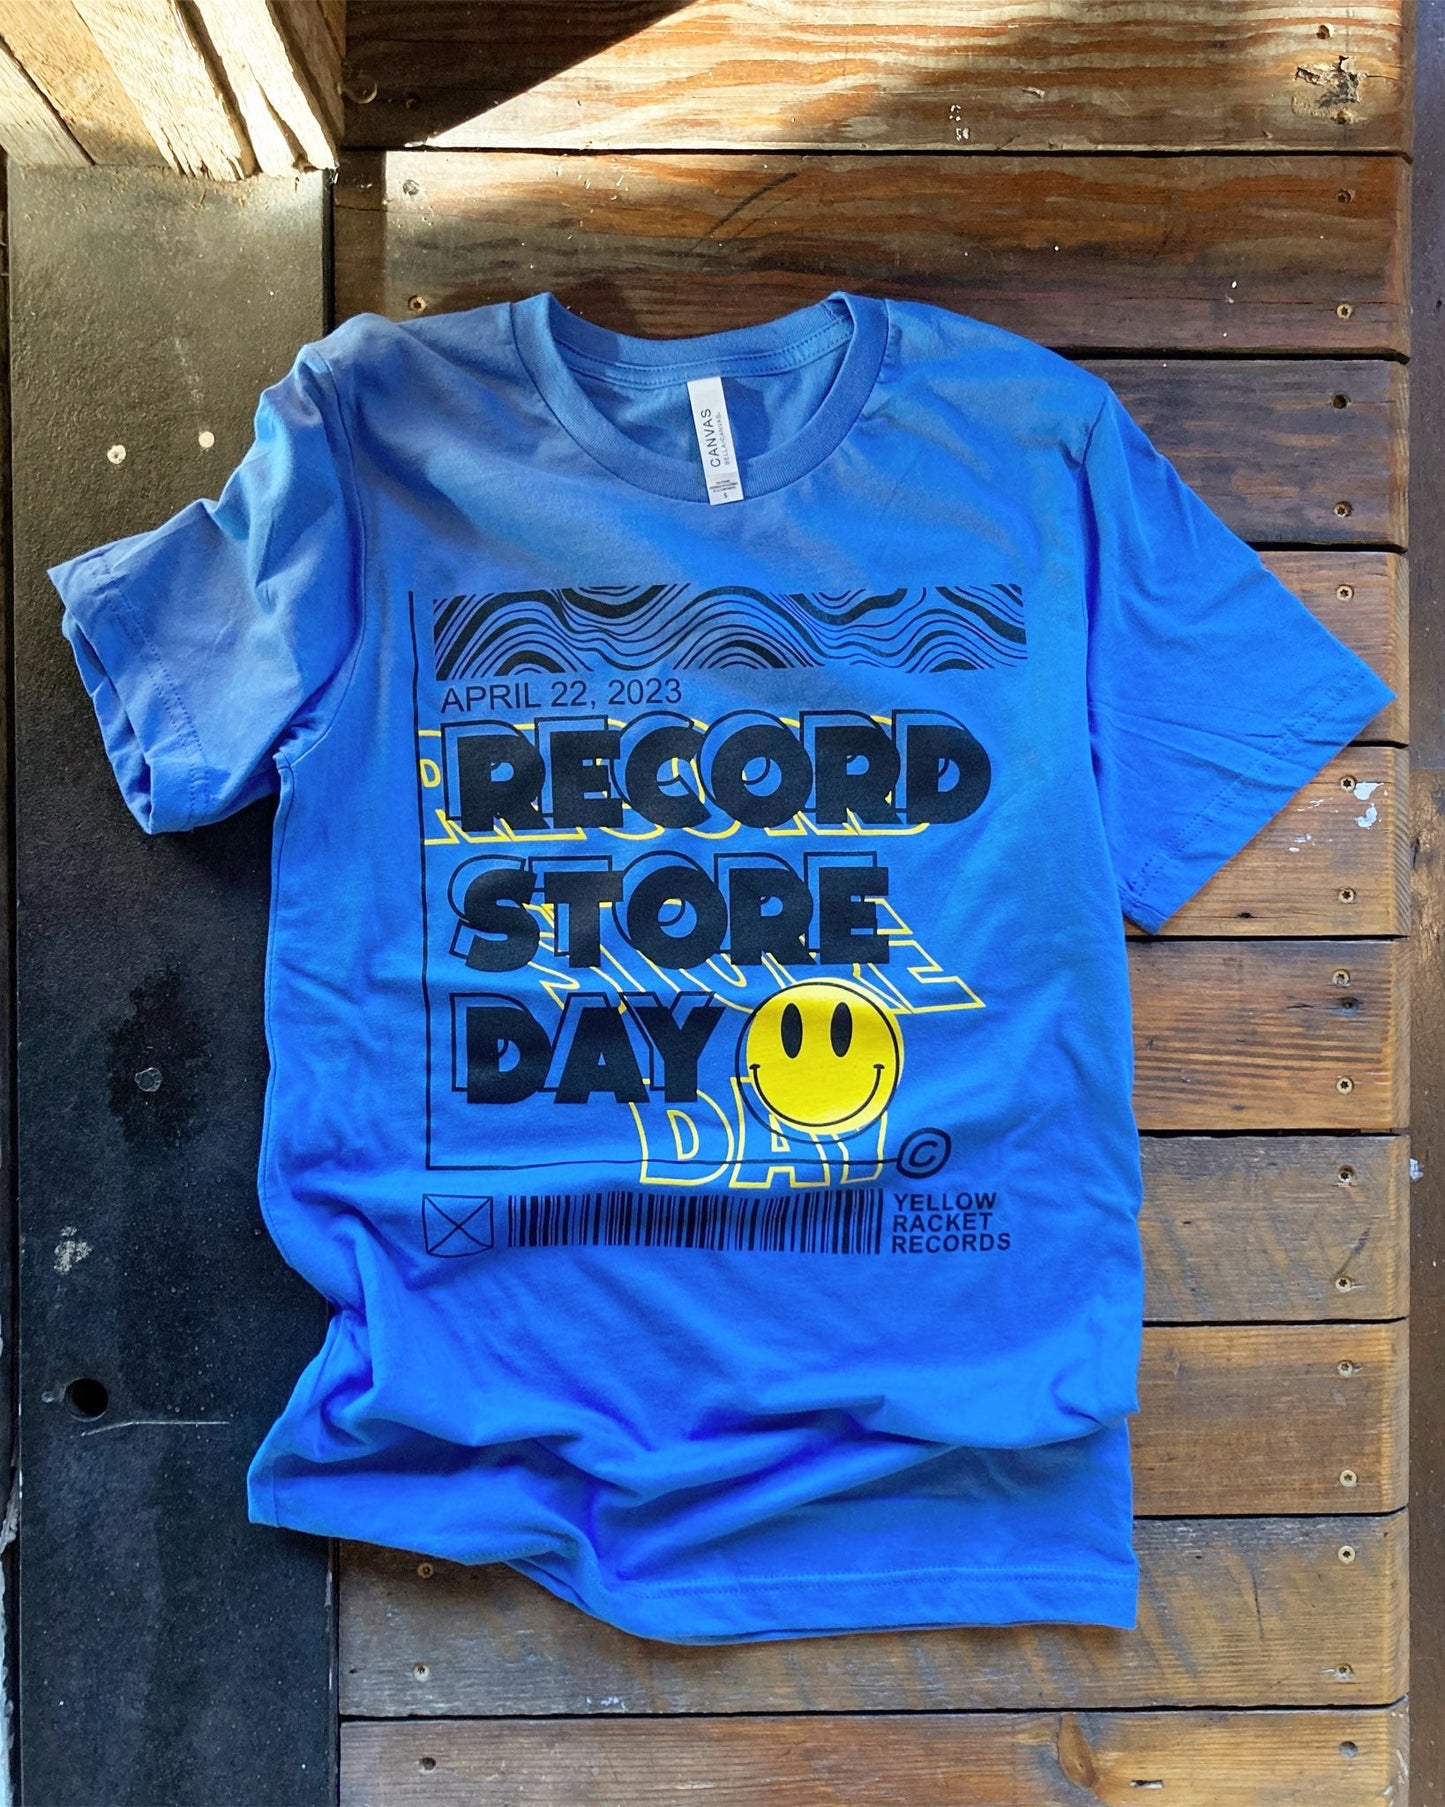 Smiley Face T-Shirt (Blue/Black/Yellow) - Record Store Day 2023 - Smiley Face T-Shirt (Blue/Black/Yellow) - Record Store Day 2023 - M - Apparel - Yellow Racket Records